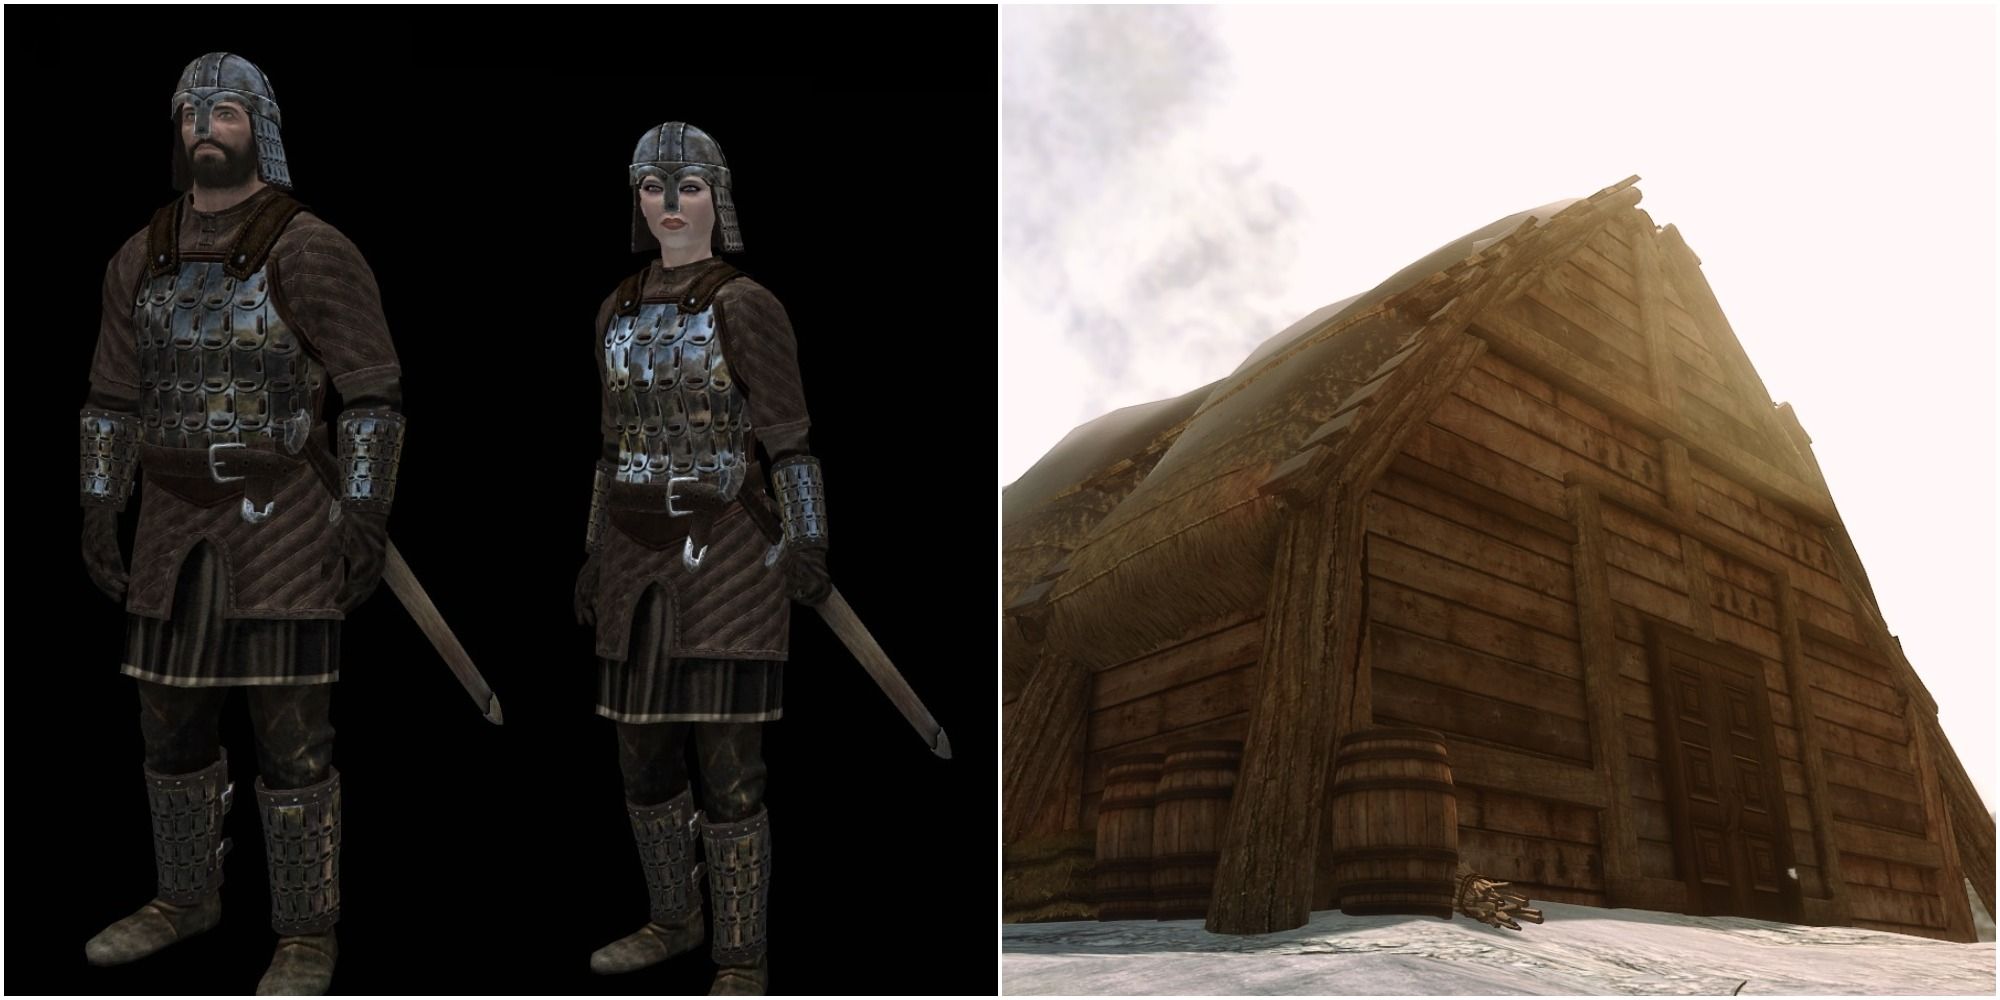 Skryim Viking Armor and House added via mods to transform the game into a Norse themed game